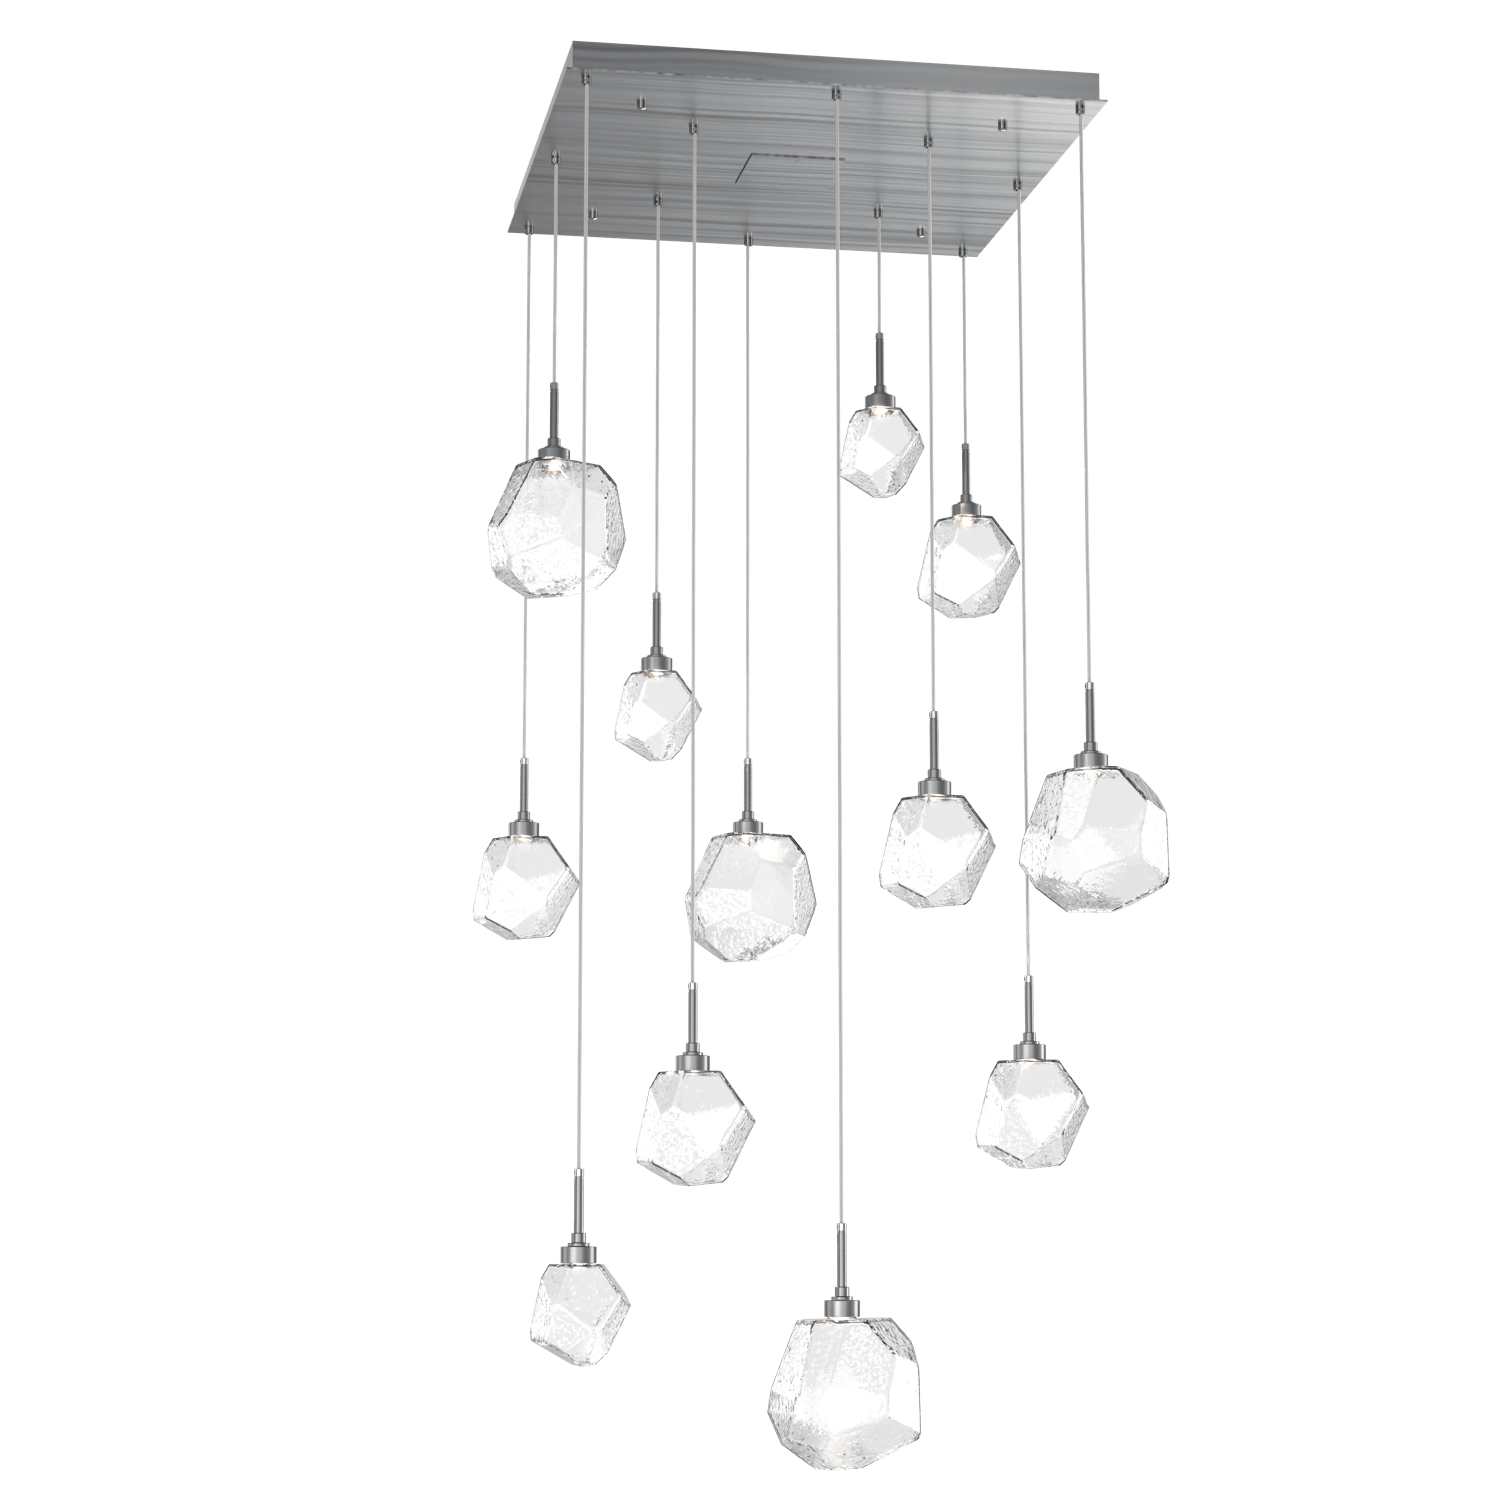 CHB0039-12-GM-C-Hammerton-Studio-Gem-12-light-square-pendant-chandelier-with-gunmetal-finish-and-clear-blown-glass-shades-and-LED-lamping